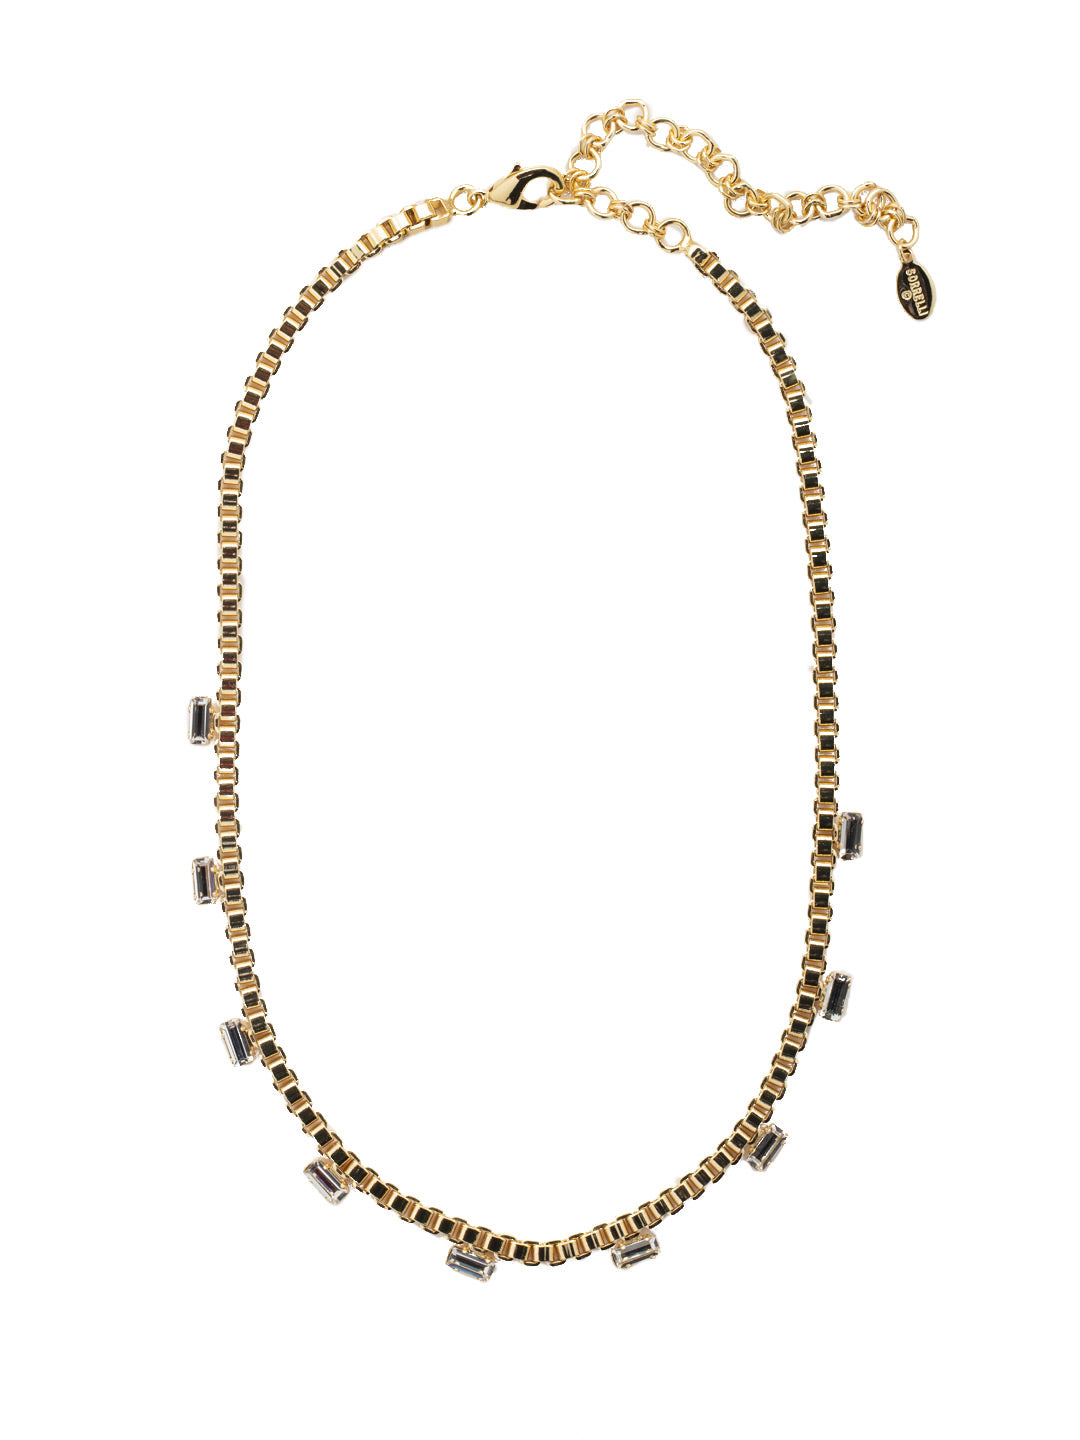 Cleo Classic Tennis Necklace - 4NEZ19BGCRY - <p>The Cleo Classic Tennis Necklace features a row of emerald cut crystals on a box chain. The lobster claw clasp secures the necklace at various lengths. From Sorrelli's Crystal collection in our Bright Gold-tone finish.</p>